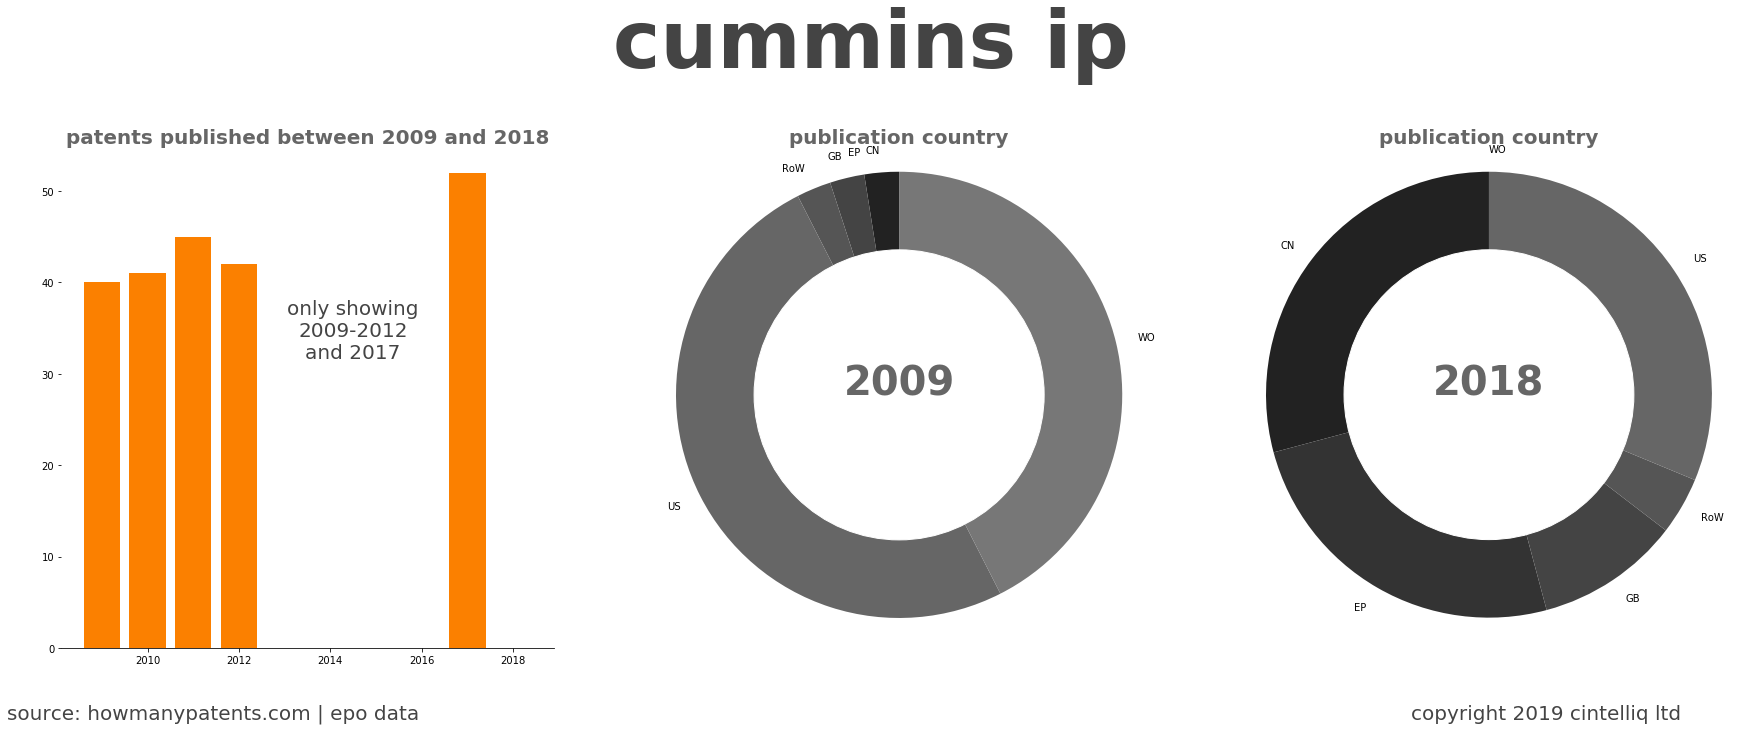 summary of patents for Cummins Ip